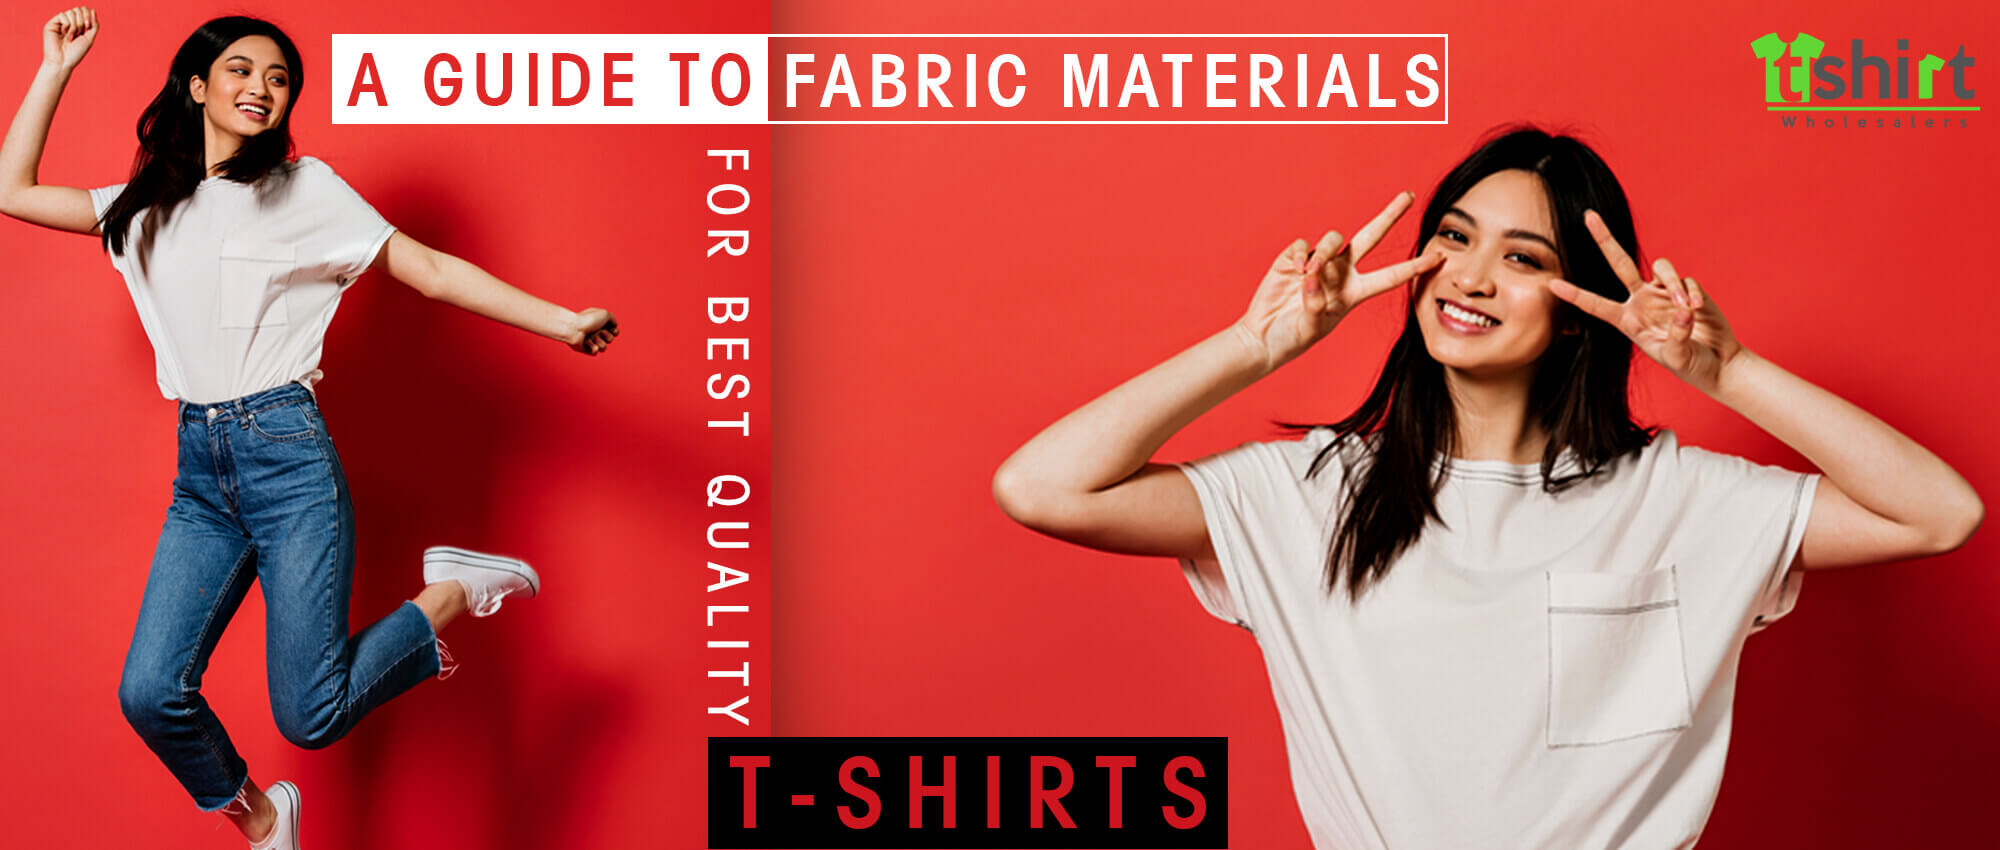 A GUIDE TO FABRIC MATERIALS FOR BEST QUALITY T-SHIRTS